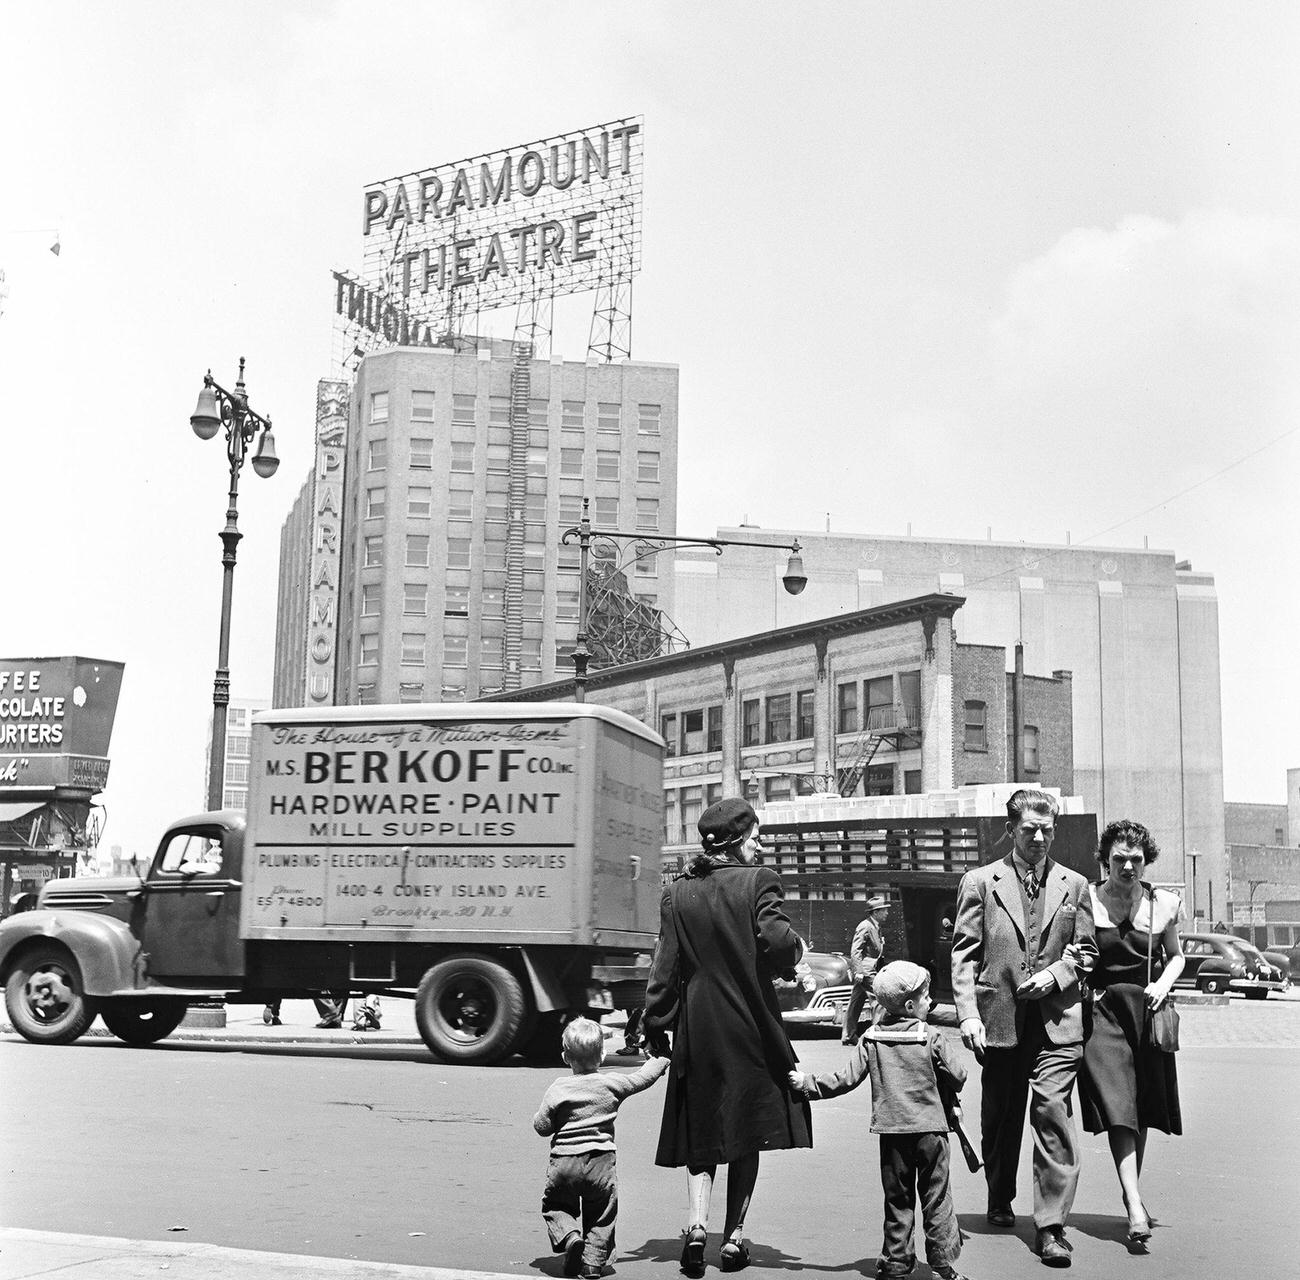 Intersection Of Fulton Street And Flatbush Avenue, Towards The Paramount Theatre, Brooklyn, 1948